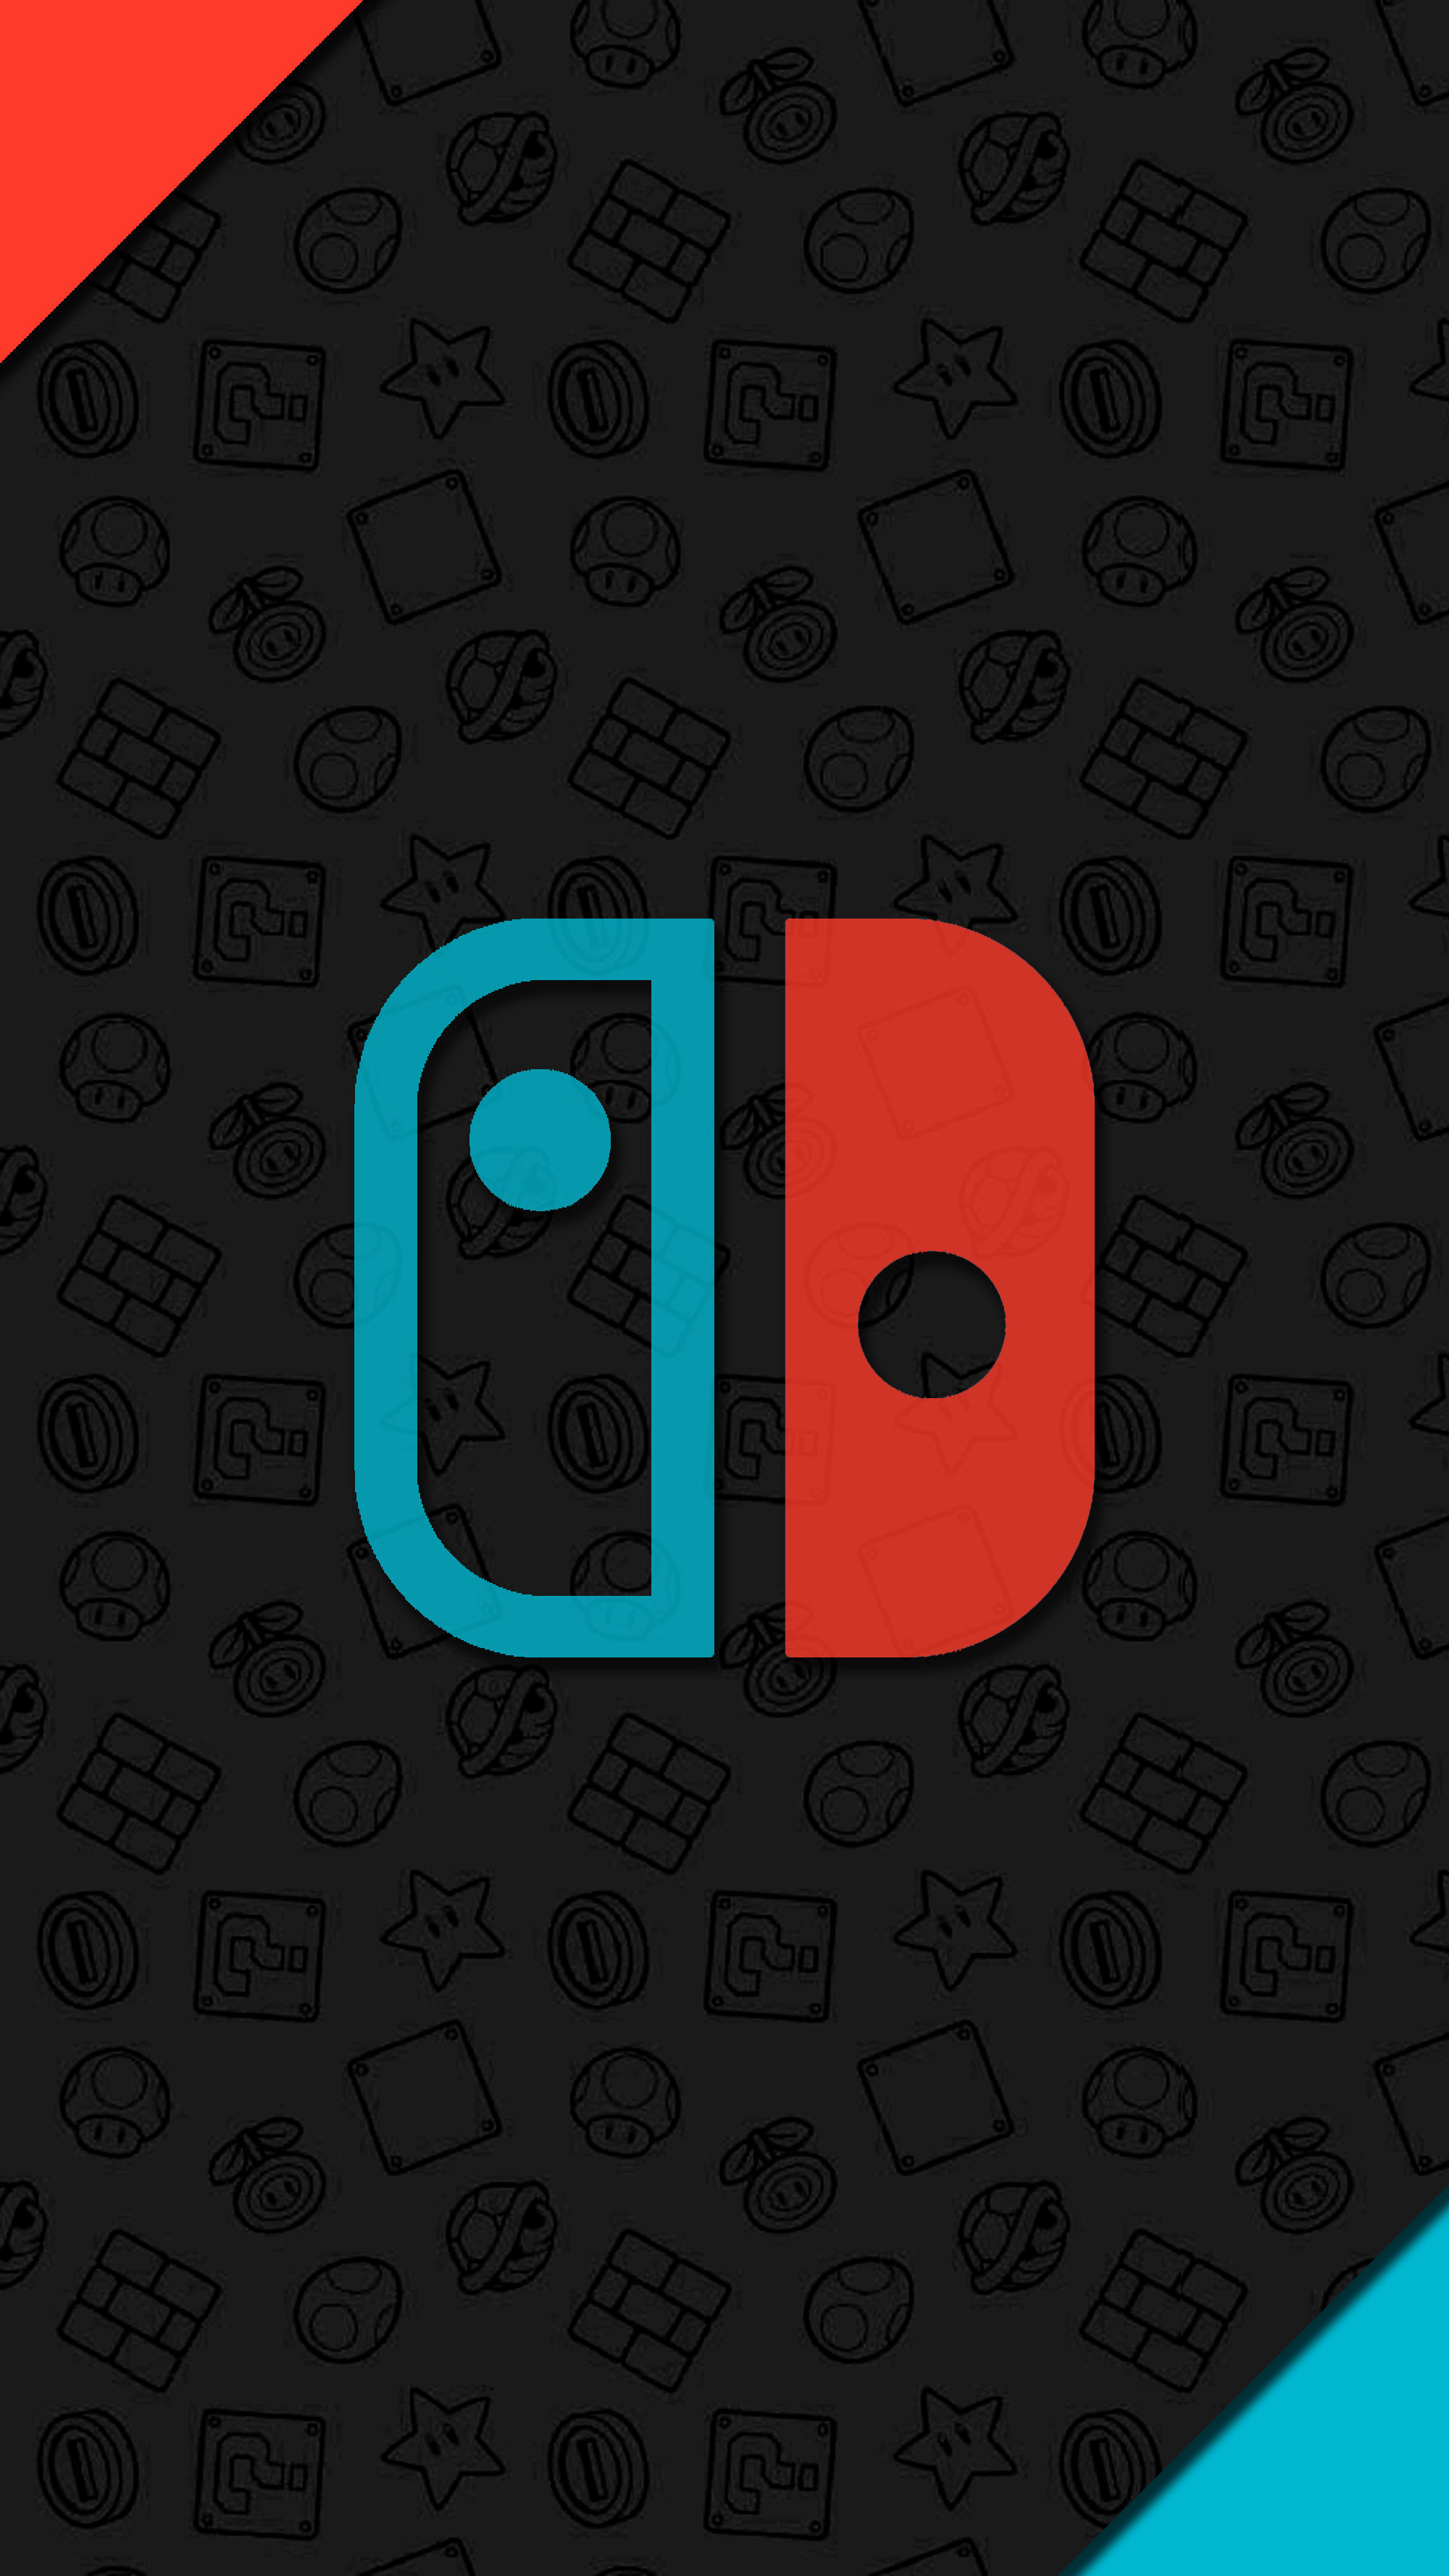 Nintendo Switch Wallpaper for your phone High rez New